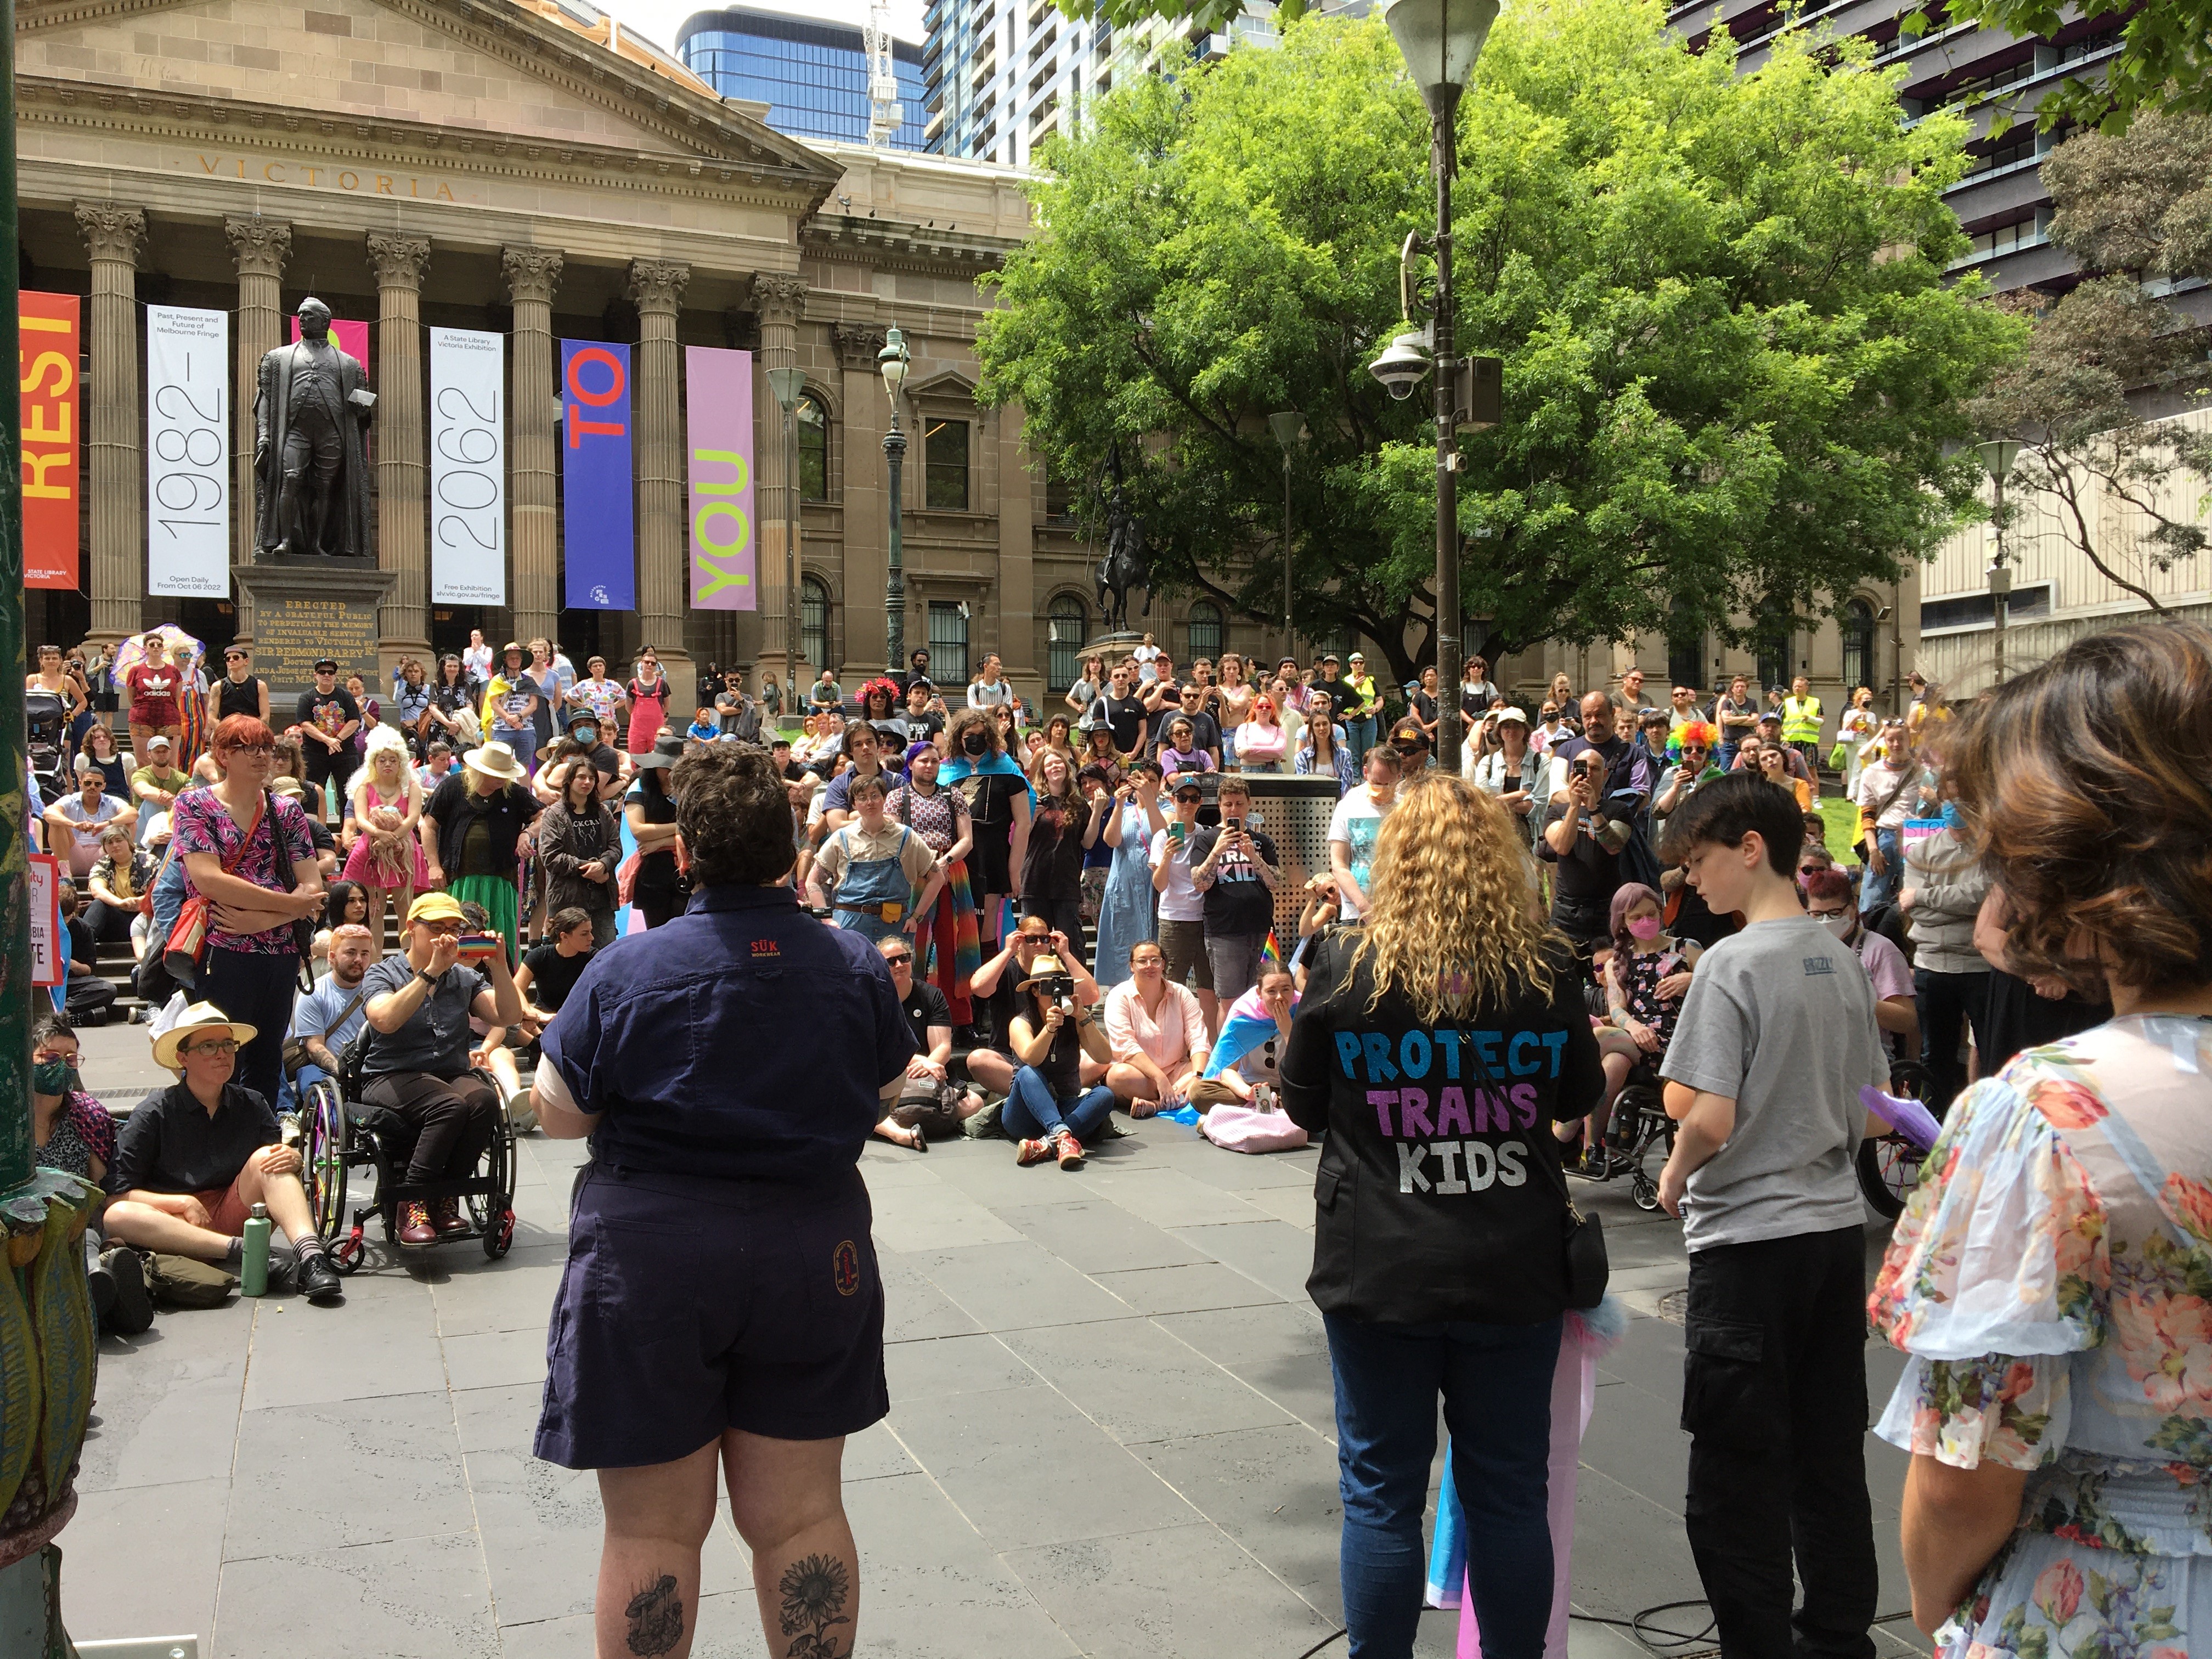 Merrin & Jay Wake speaking at the Trans Pride Rally Melbourne in front of the State Library of Victoria on Sunday 13 November.